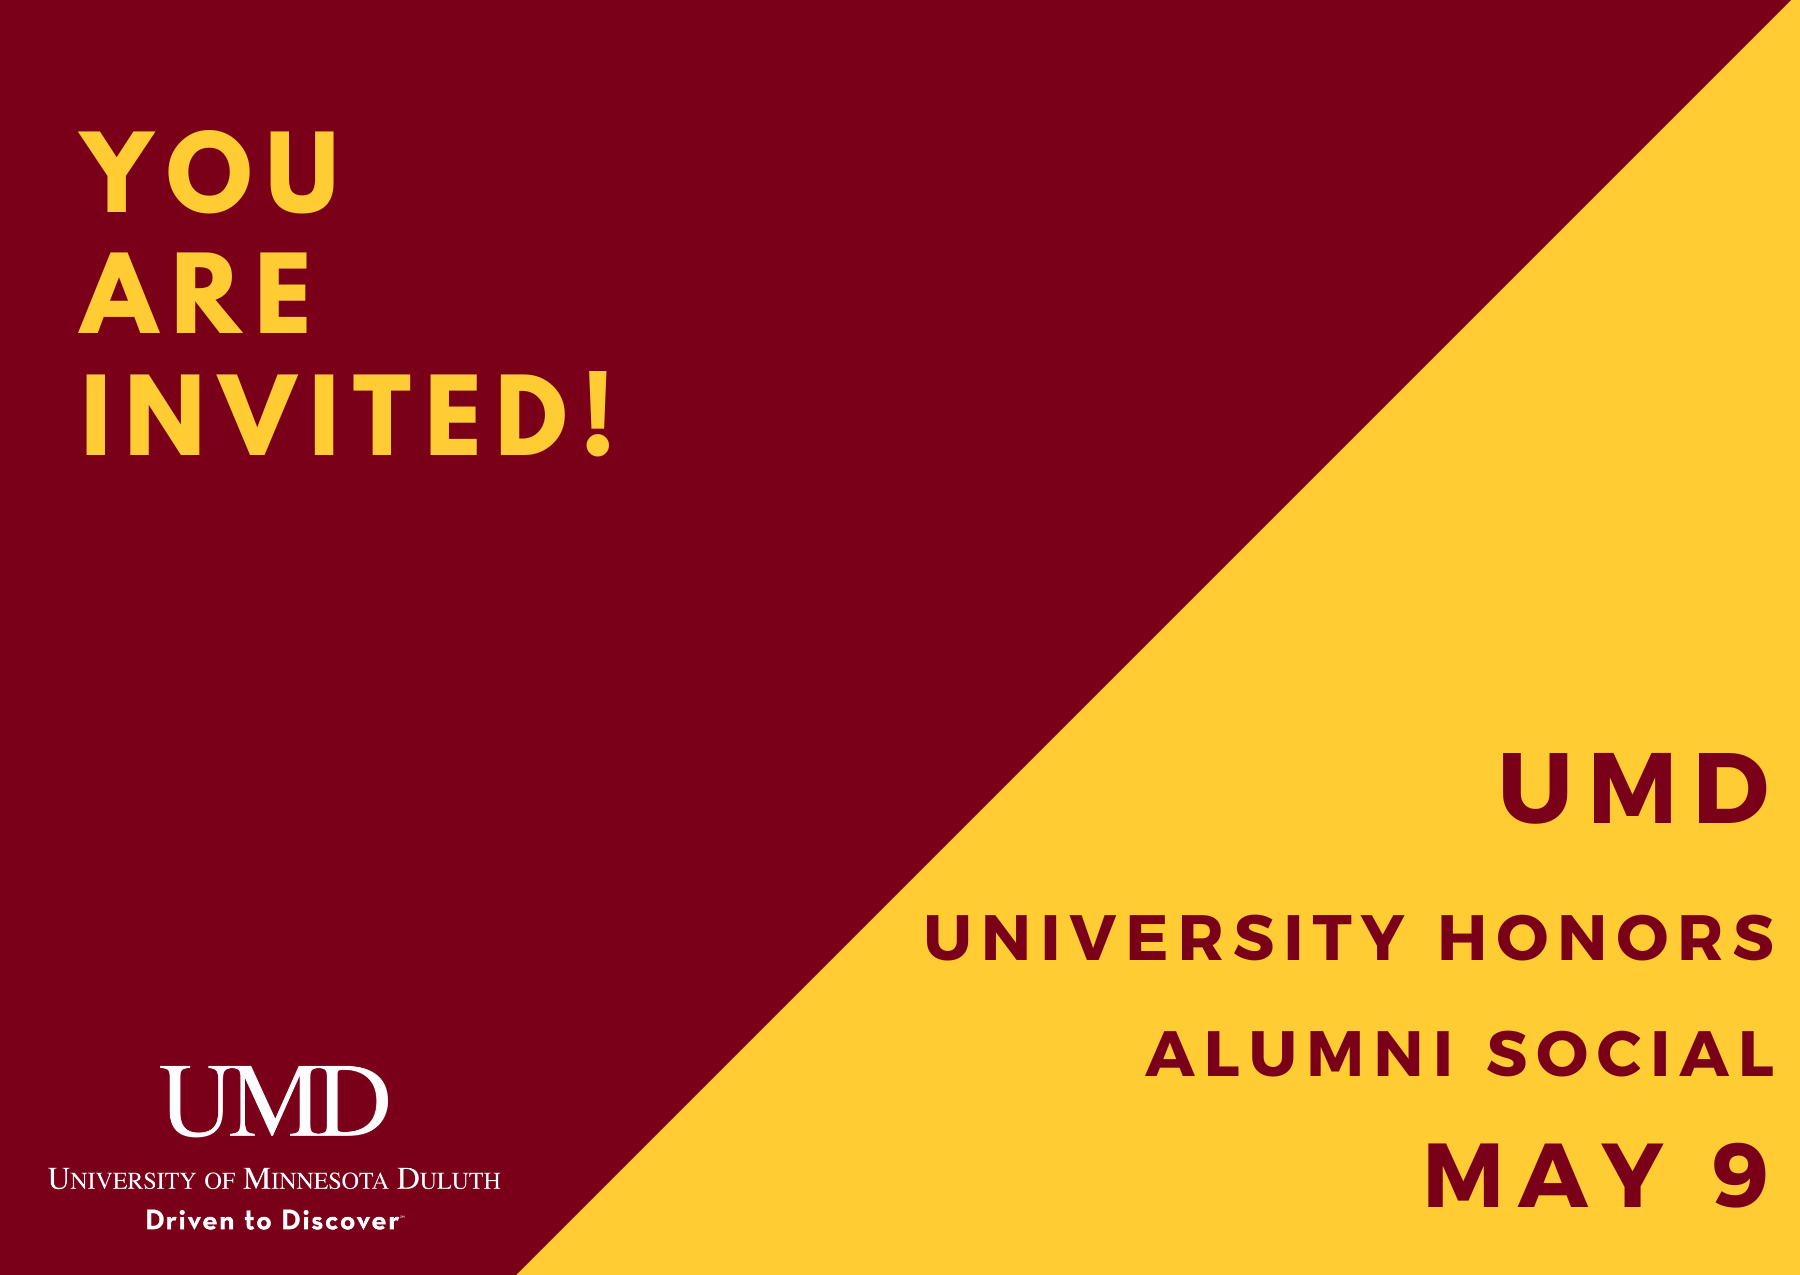 you are invited. UMD University Honors Alumni Social May 9